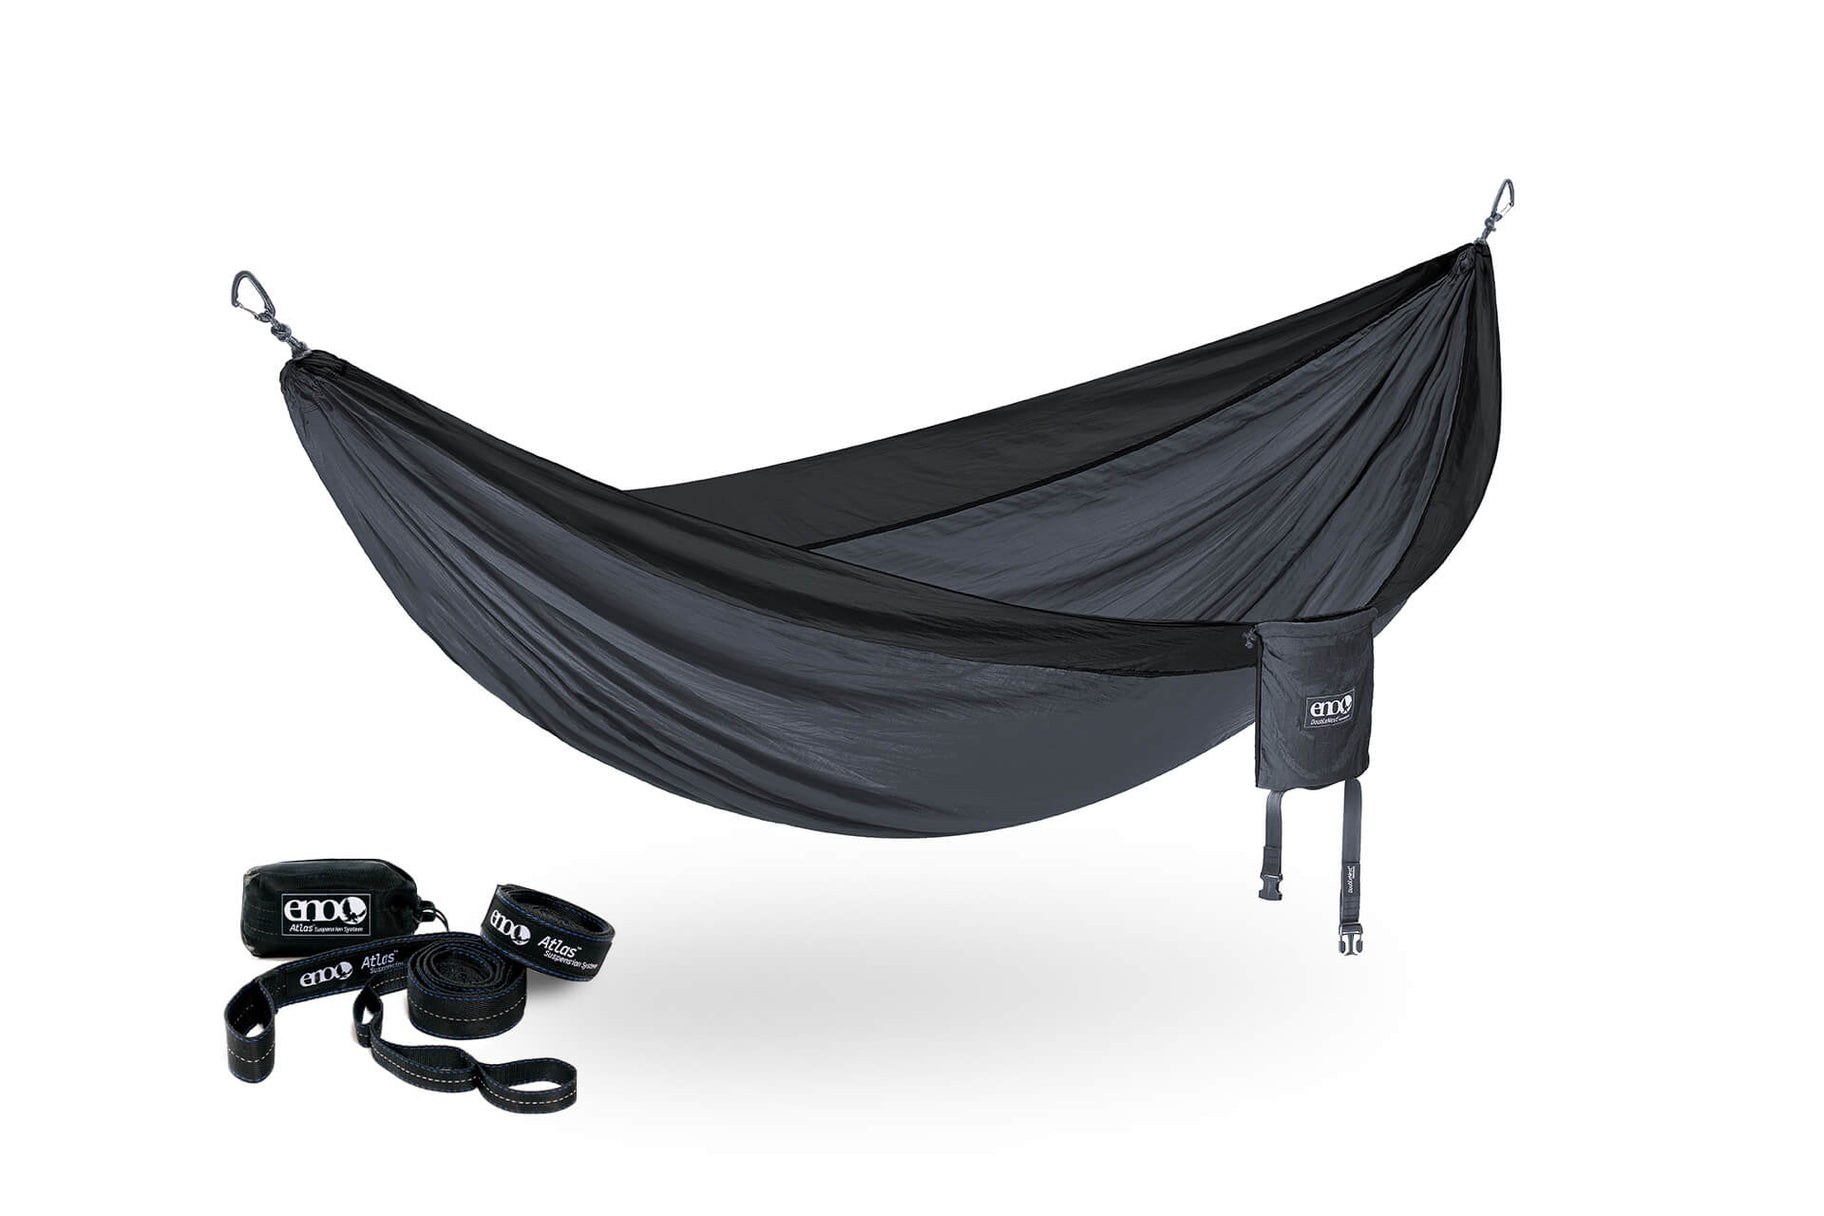 Classic Hammock + Straps Bundle - Two Person Hammock with Straps | Eno Charcoal/Black